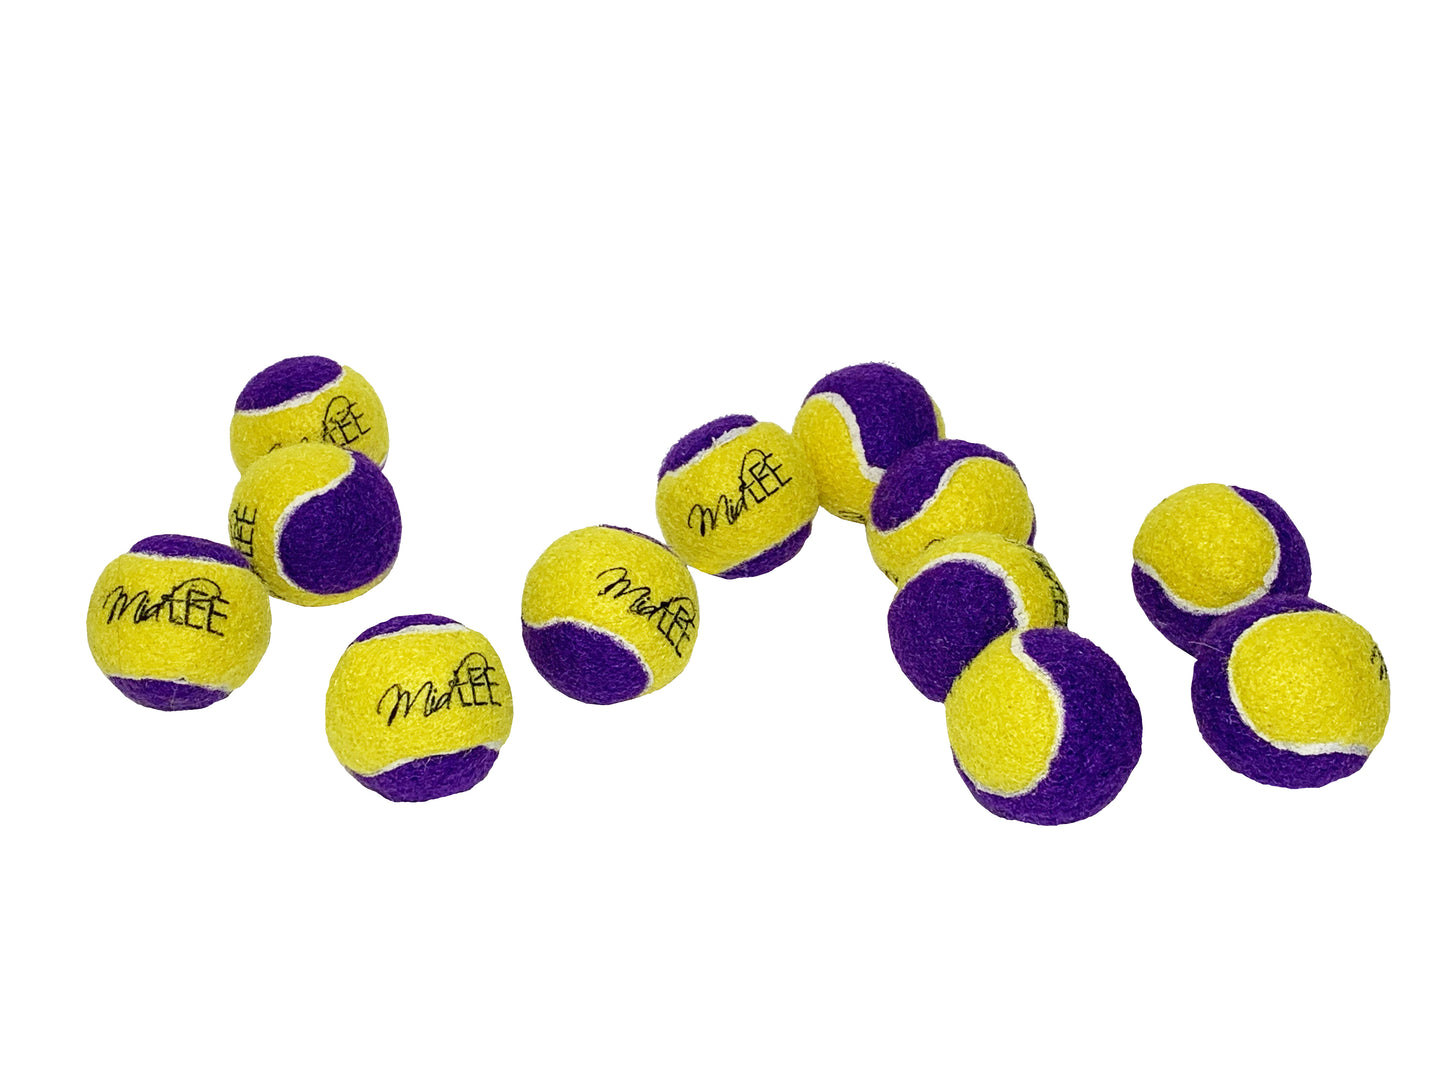 Midlee Squeaky Small Tennis Ball for Dogs 1.5"- Pack of 12 (Yellow/Purple)